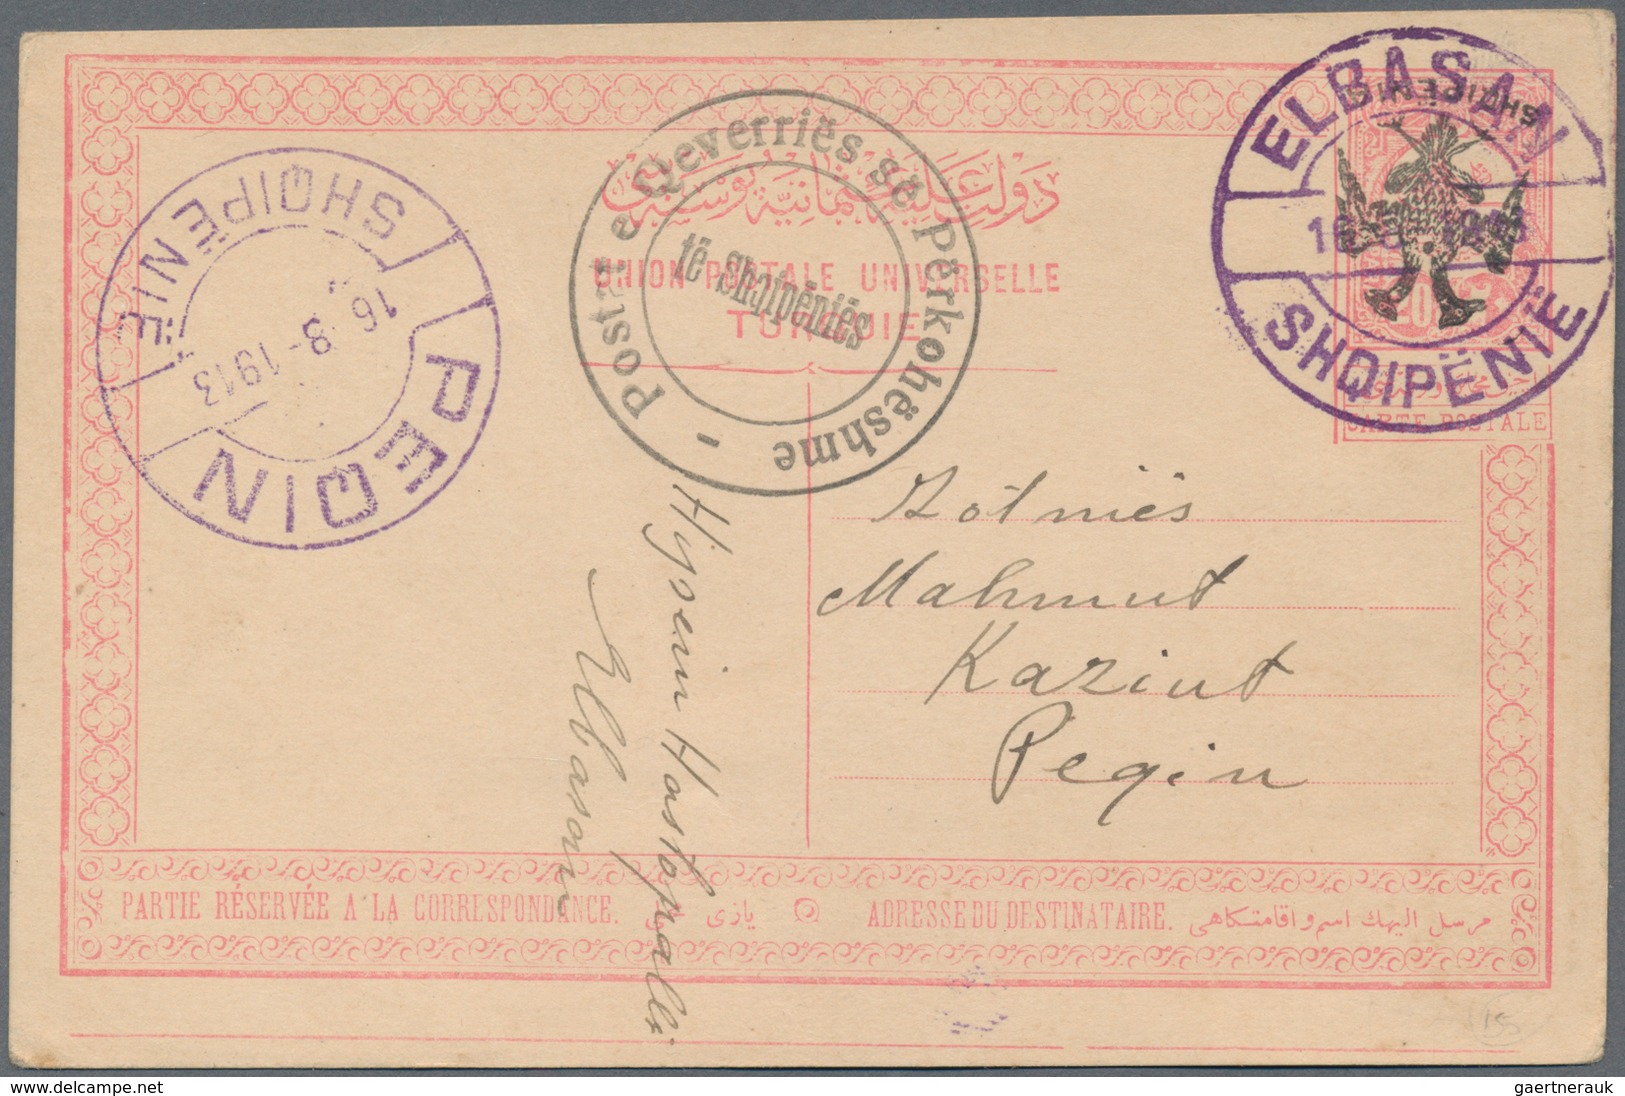 Albanien - Ganzsachen: 1913, Postal Stationery Card, 20 Pa With INVERTED Double Headed Eagle Overpri - Albania